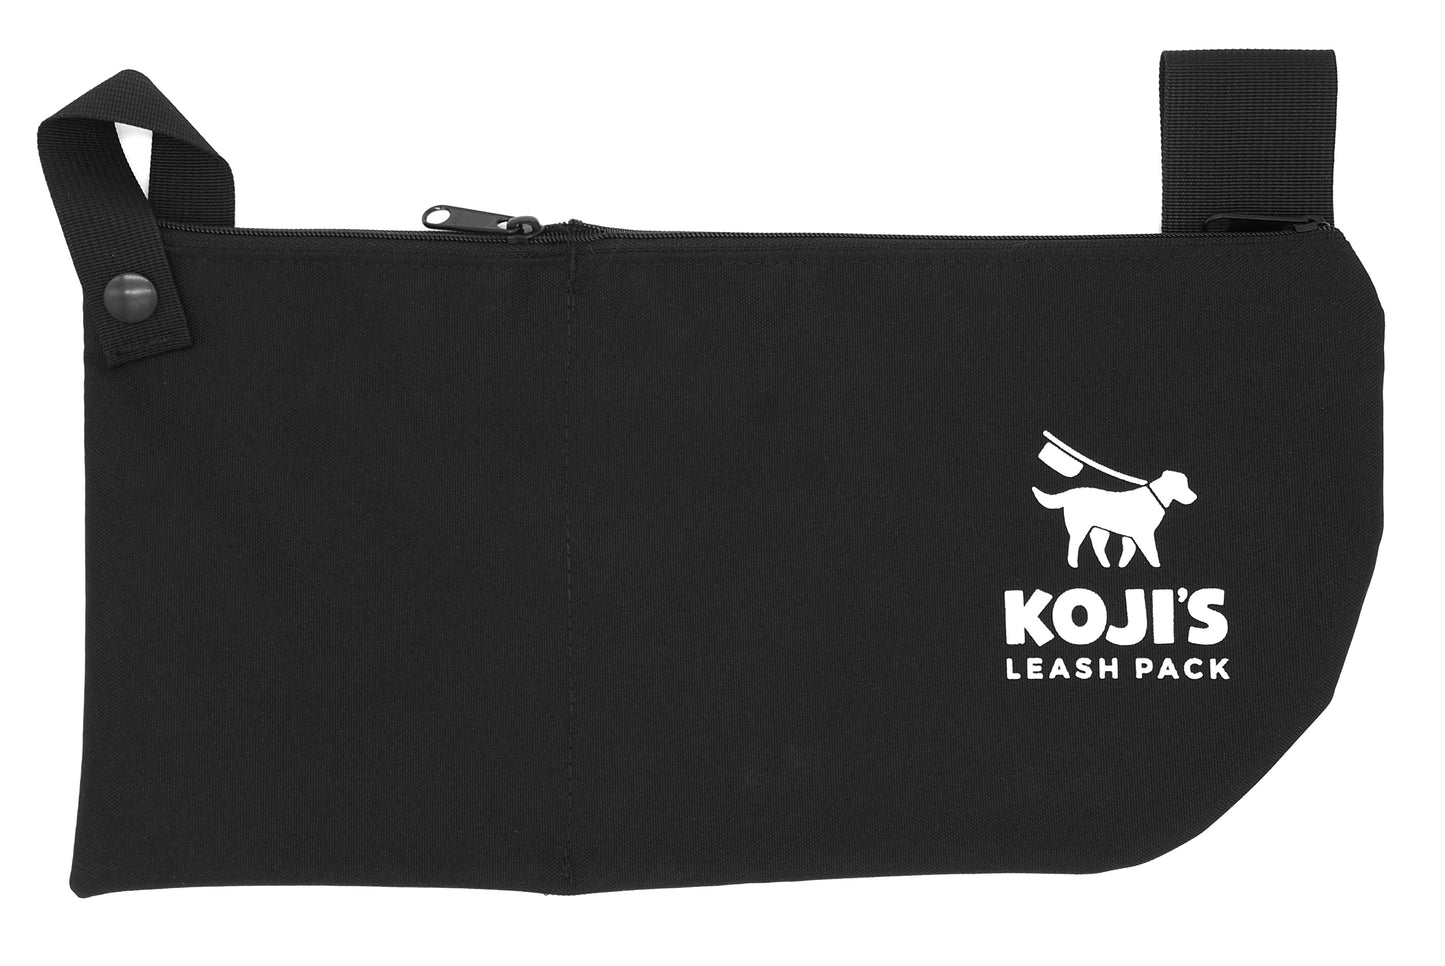 Leash Pack with Zippers (Black)